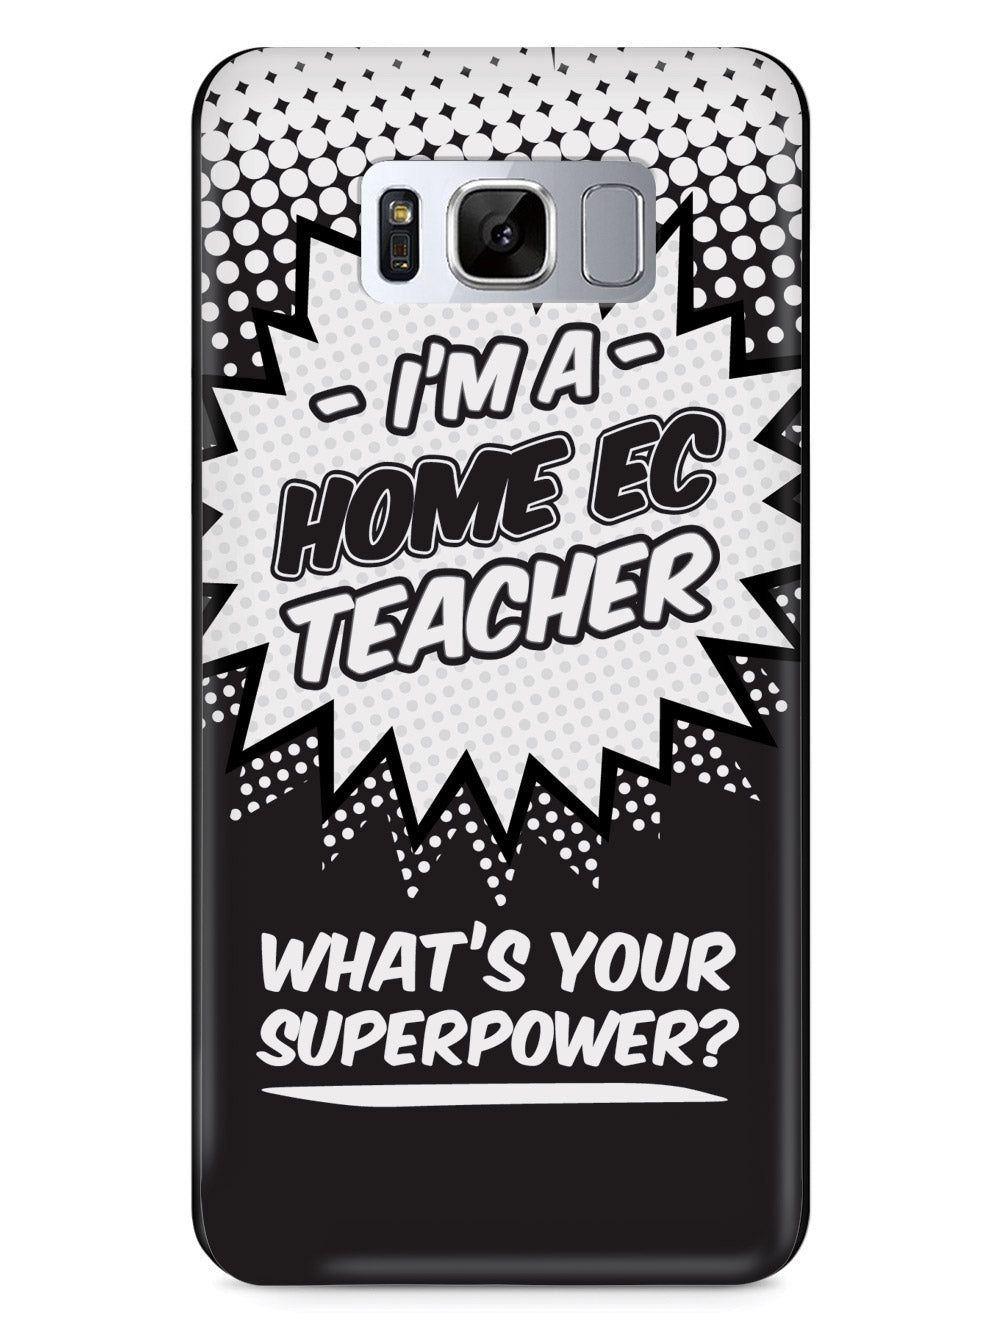 Home Ec Teacher - What's Your Superpower? Case